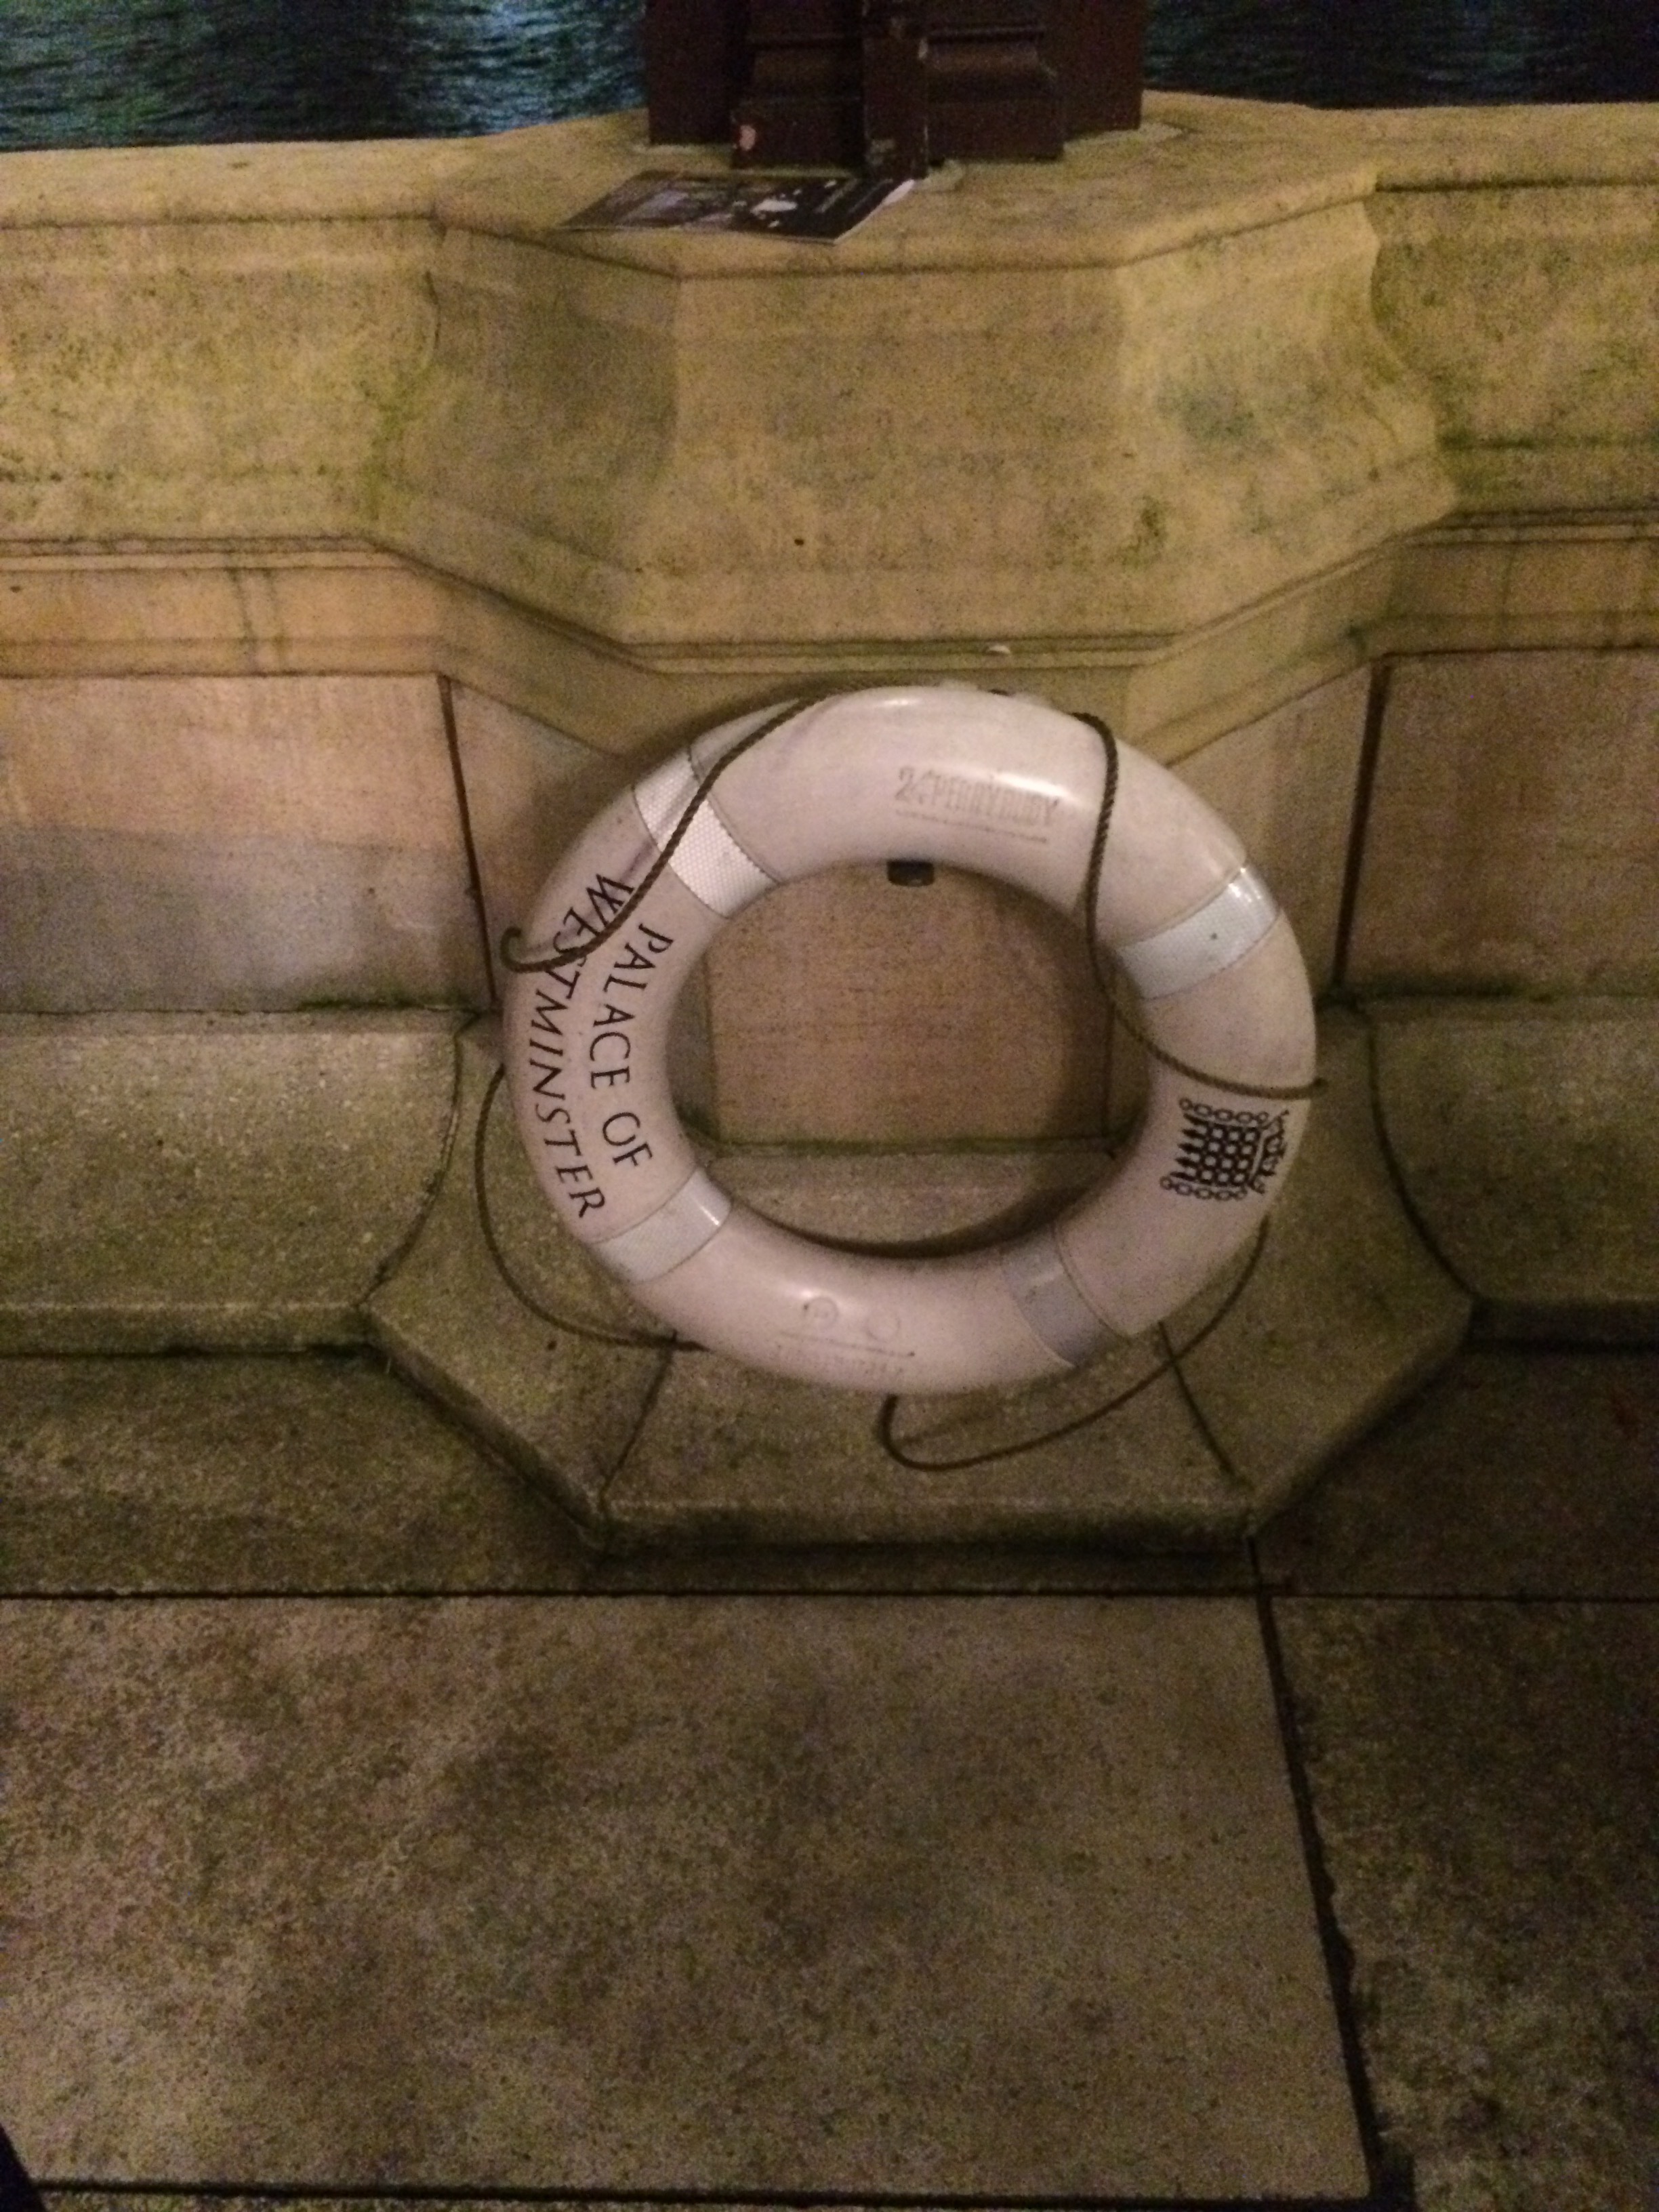 Life Preserver at the Palace of Westminster (aka Parliament)